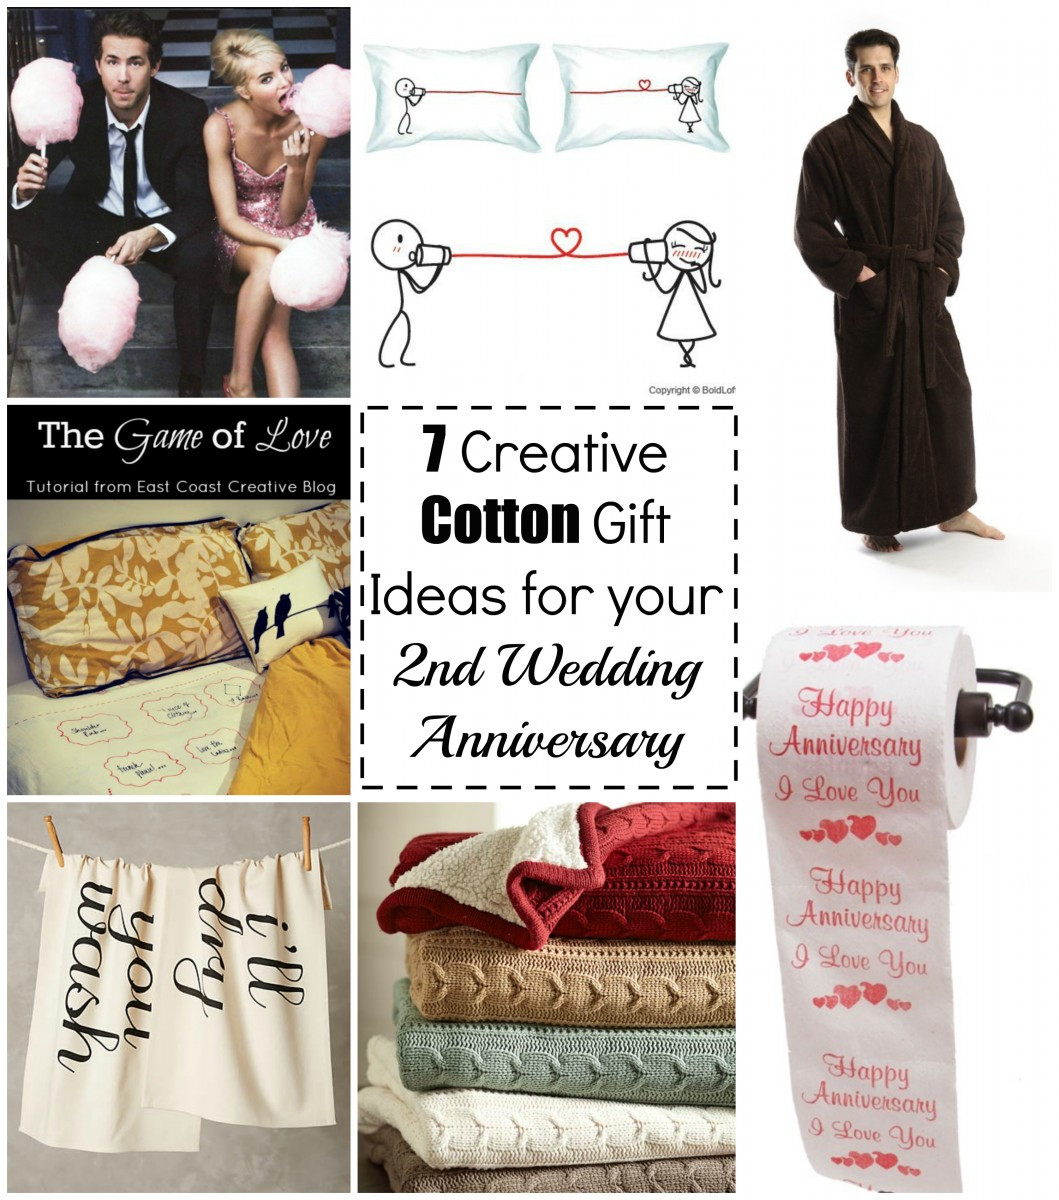 Second Anniversary Gift Ideas
 7 Cotton Gift Ideas for your 2nd Wedding Anniversary